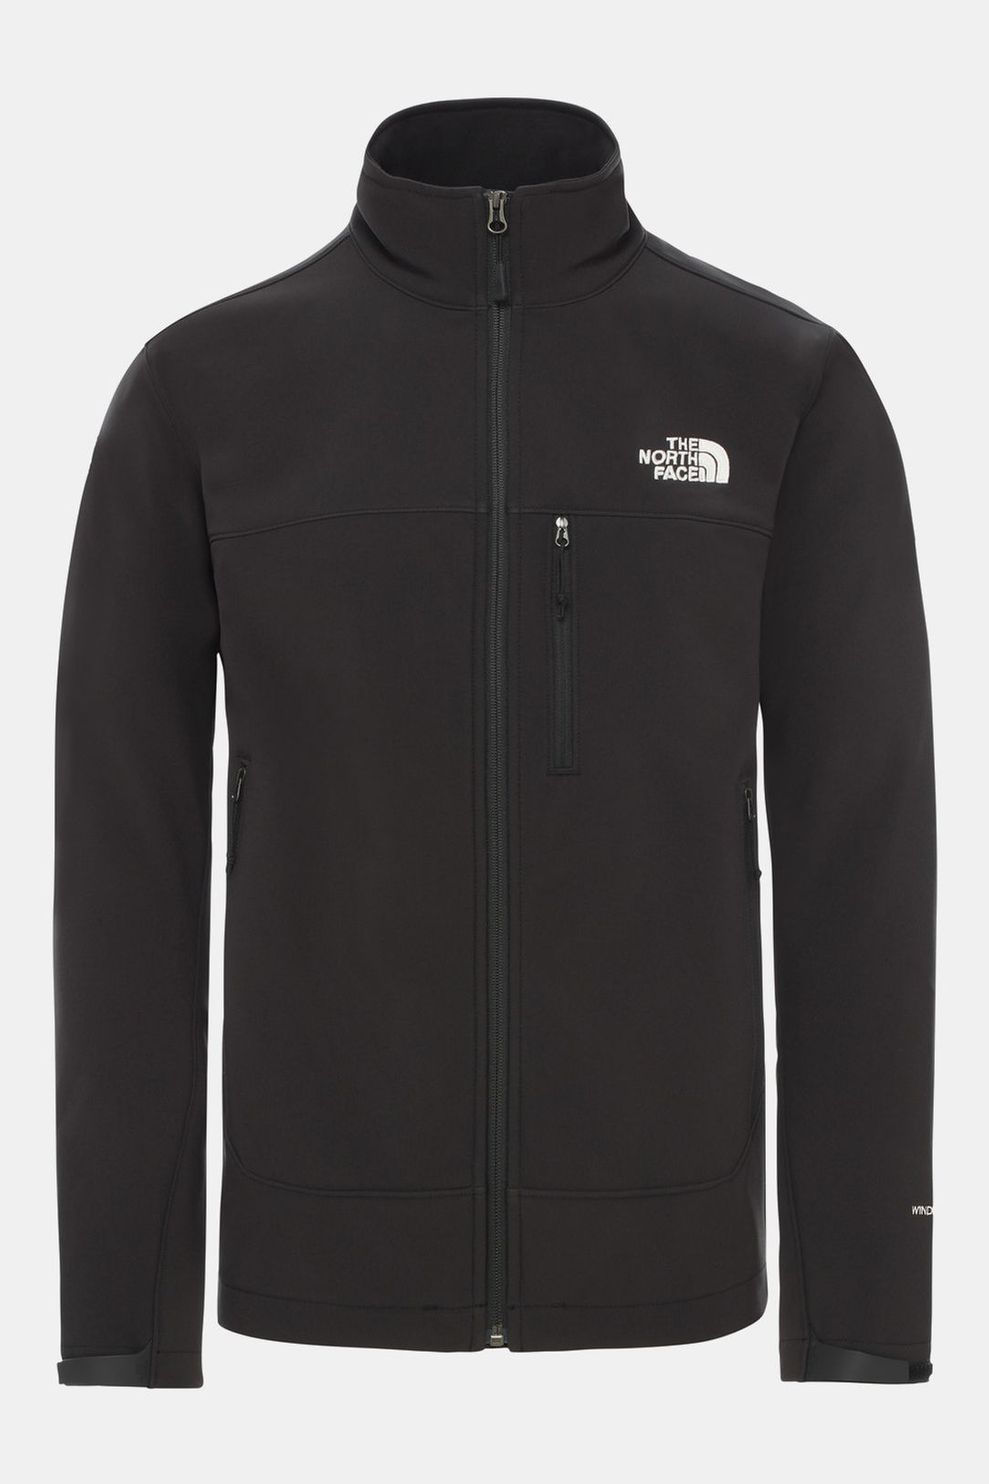 The North Face Mens Apex Bionic Jacket